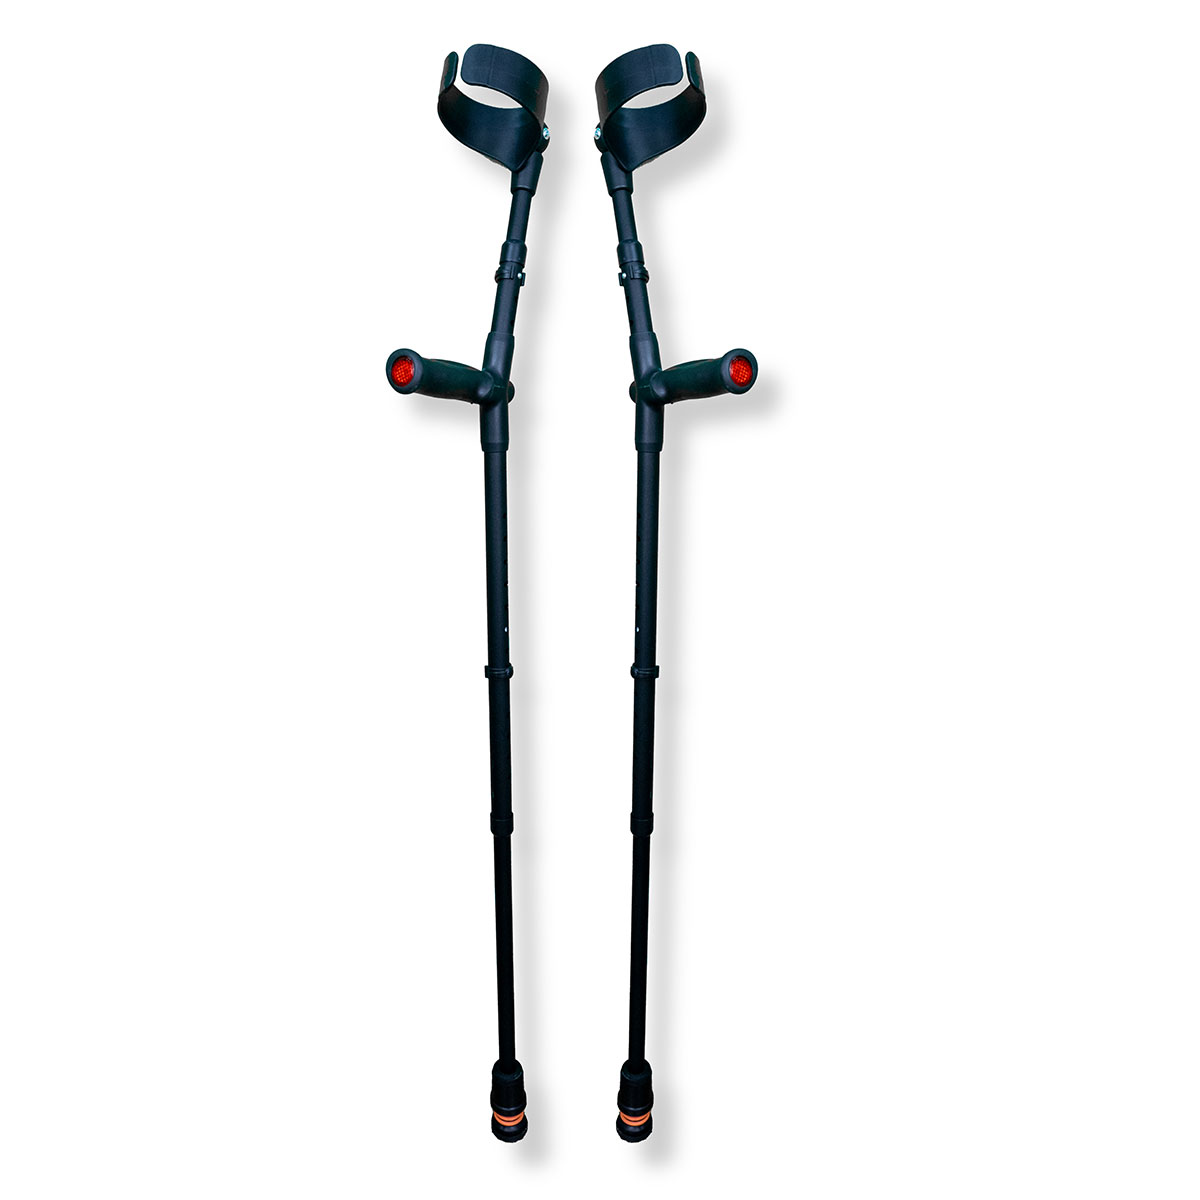 Forearm Crutches Height Adjustable Size Large, Black